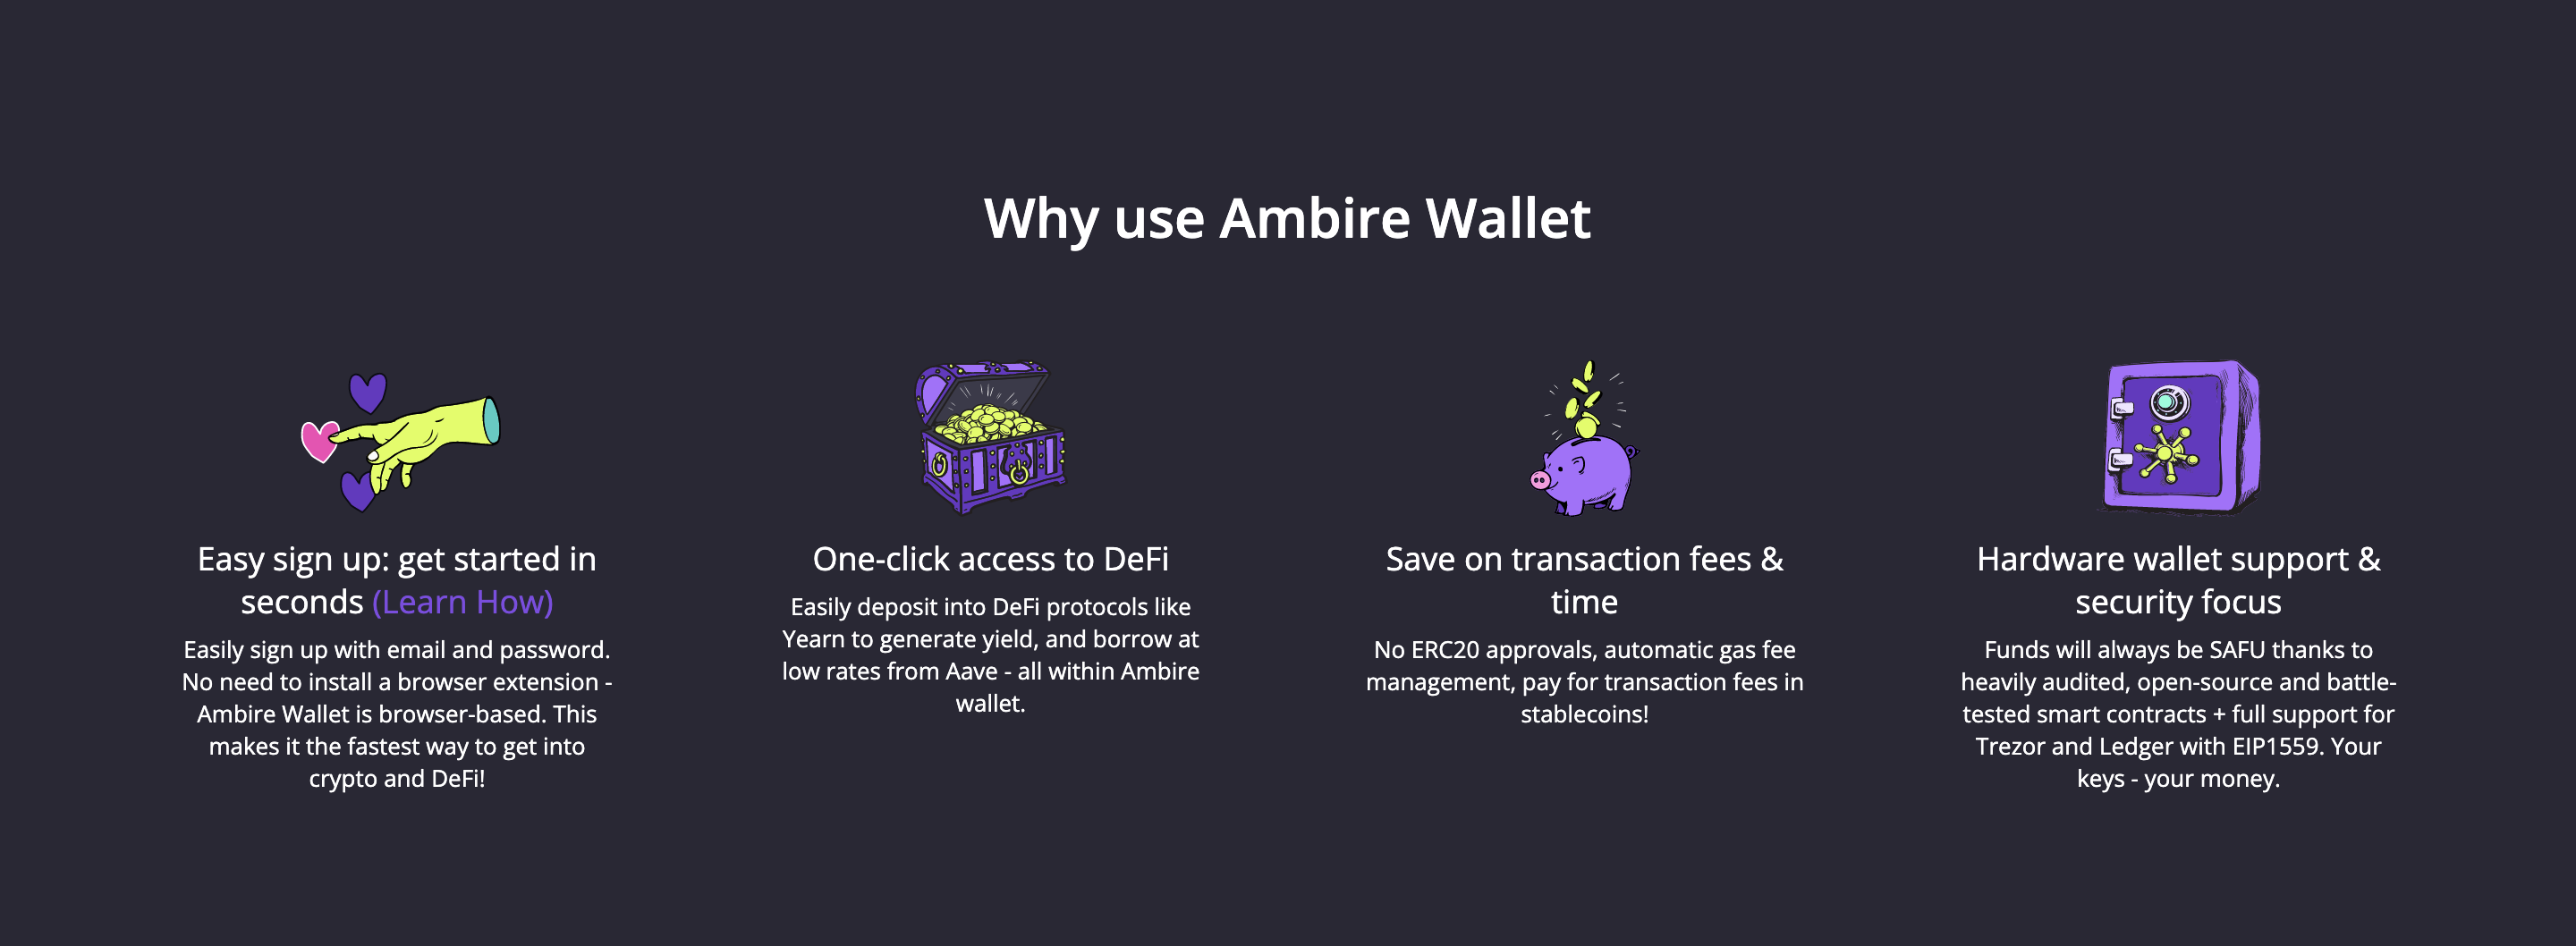 Ambire Wallet About